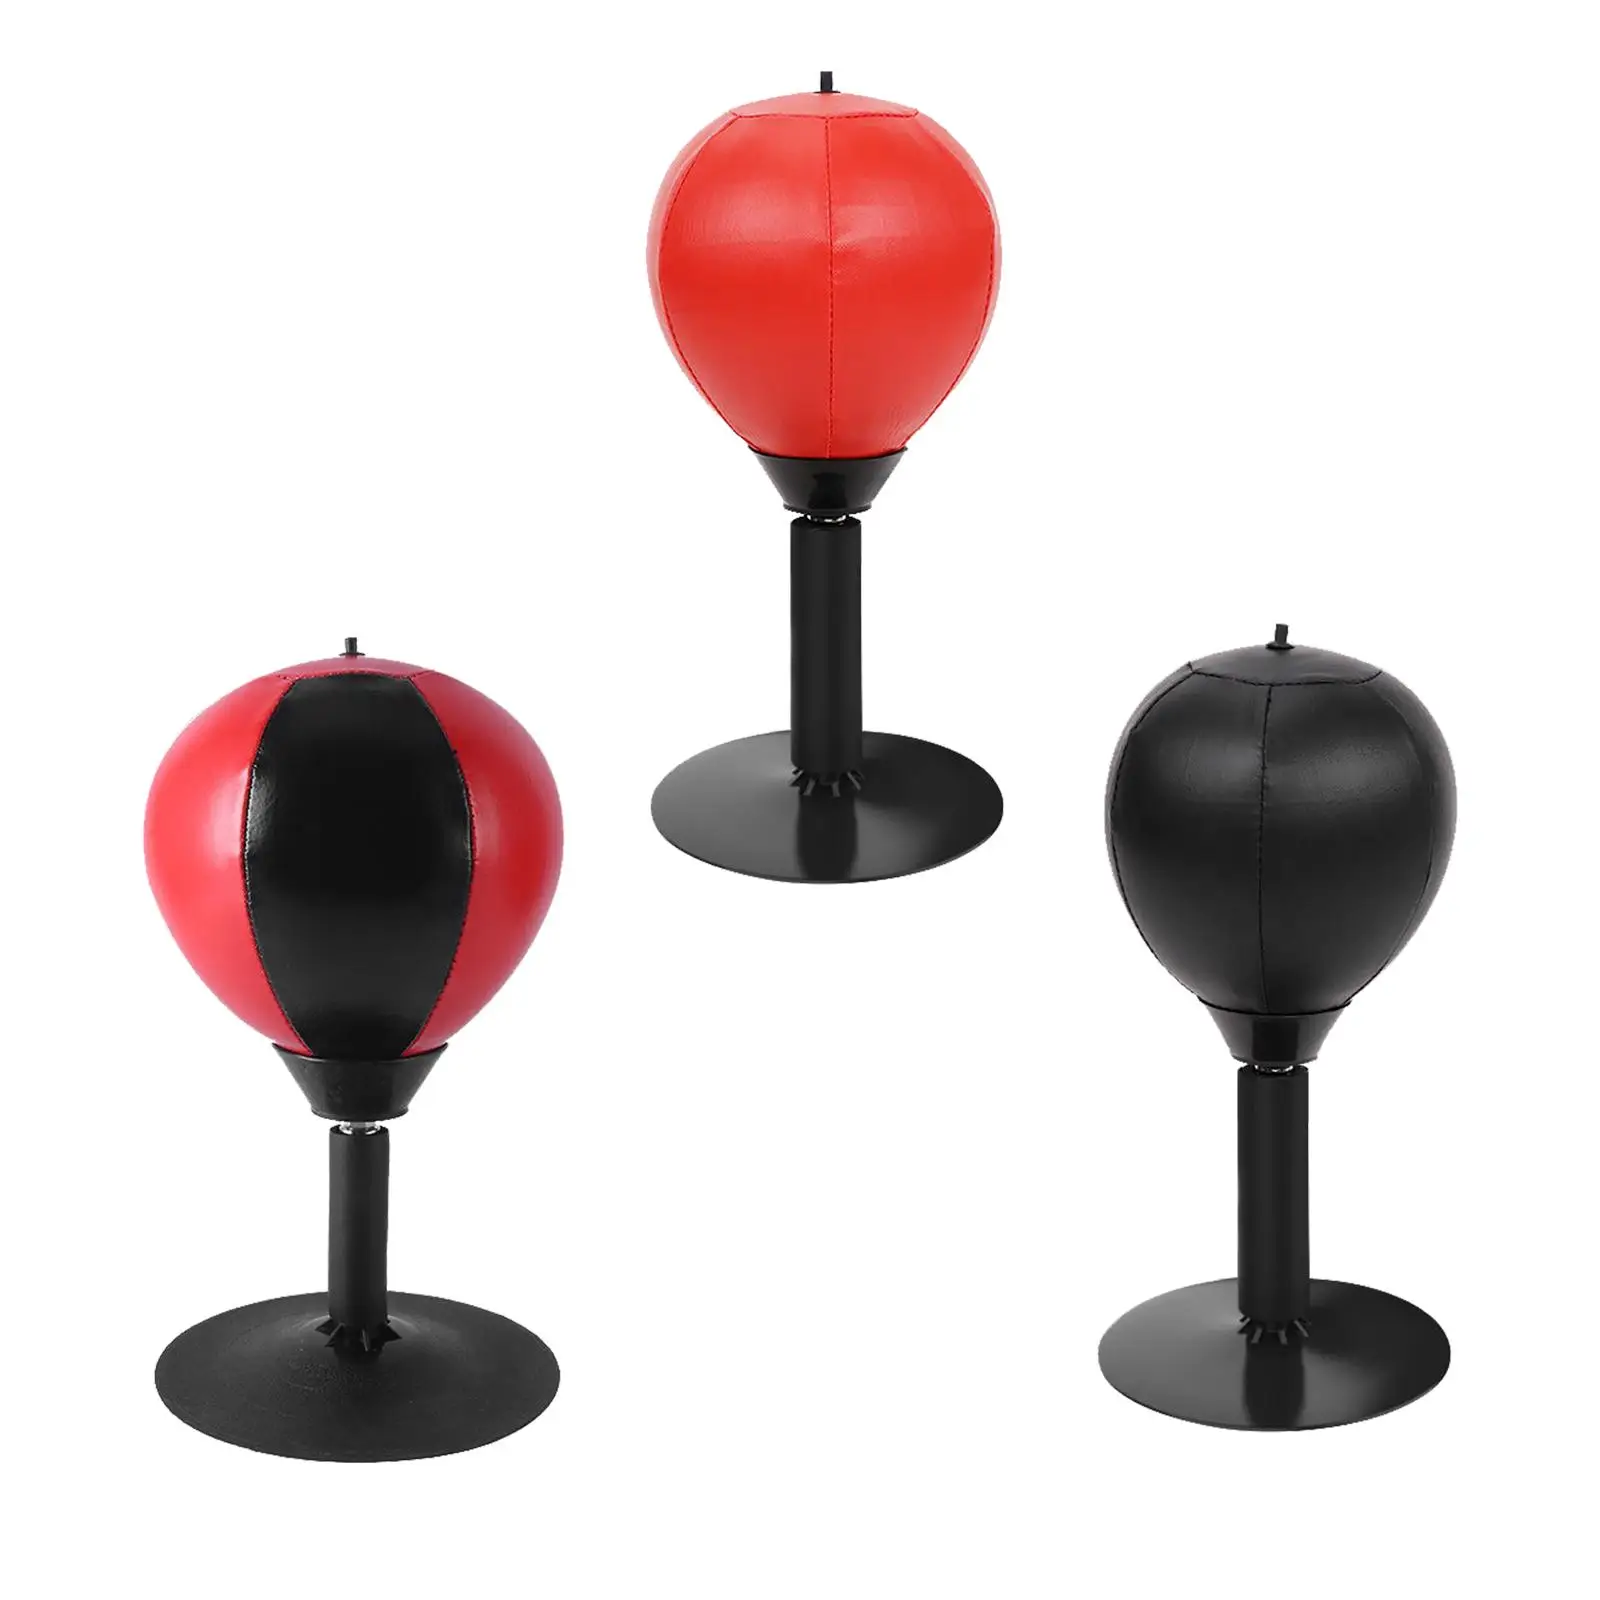 Punching Bag Speed Ball Suction Cup Desktop Boxing Ball for Practice Exercise